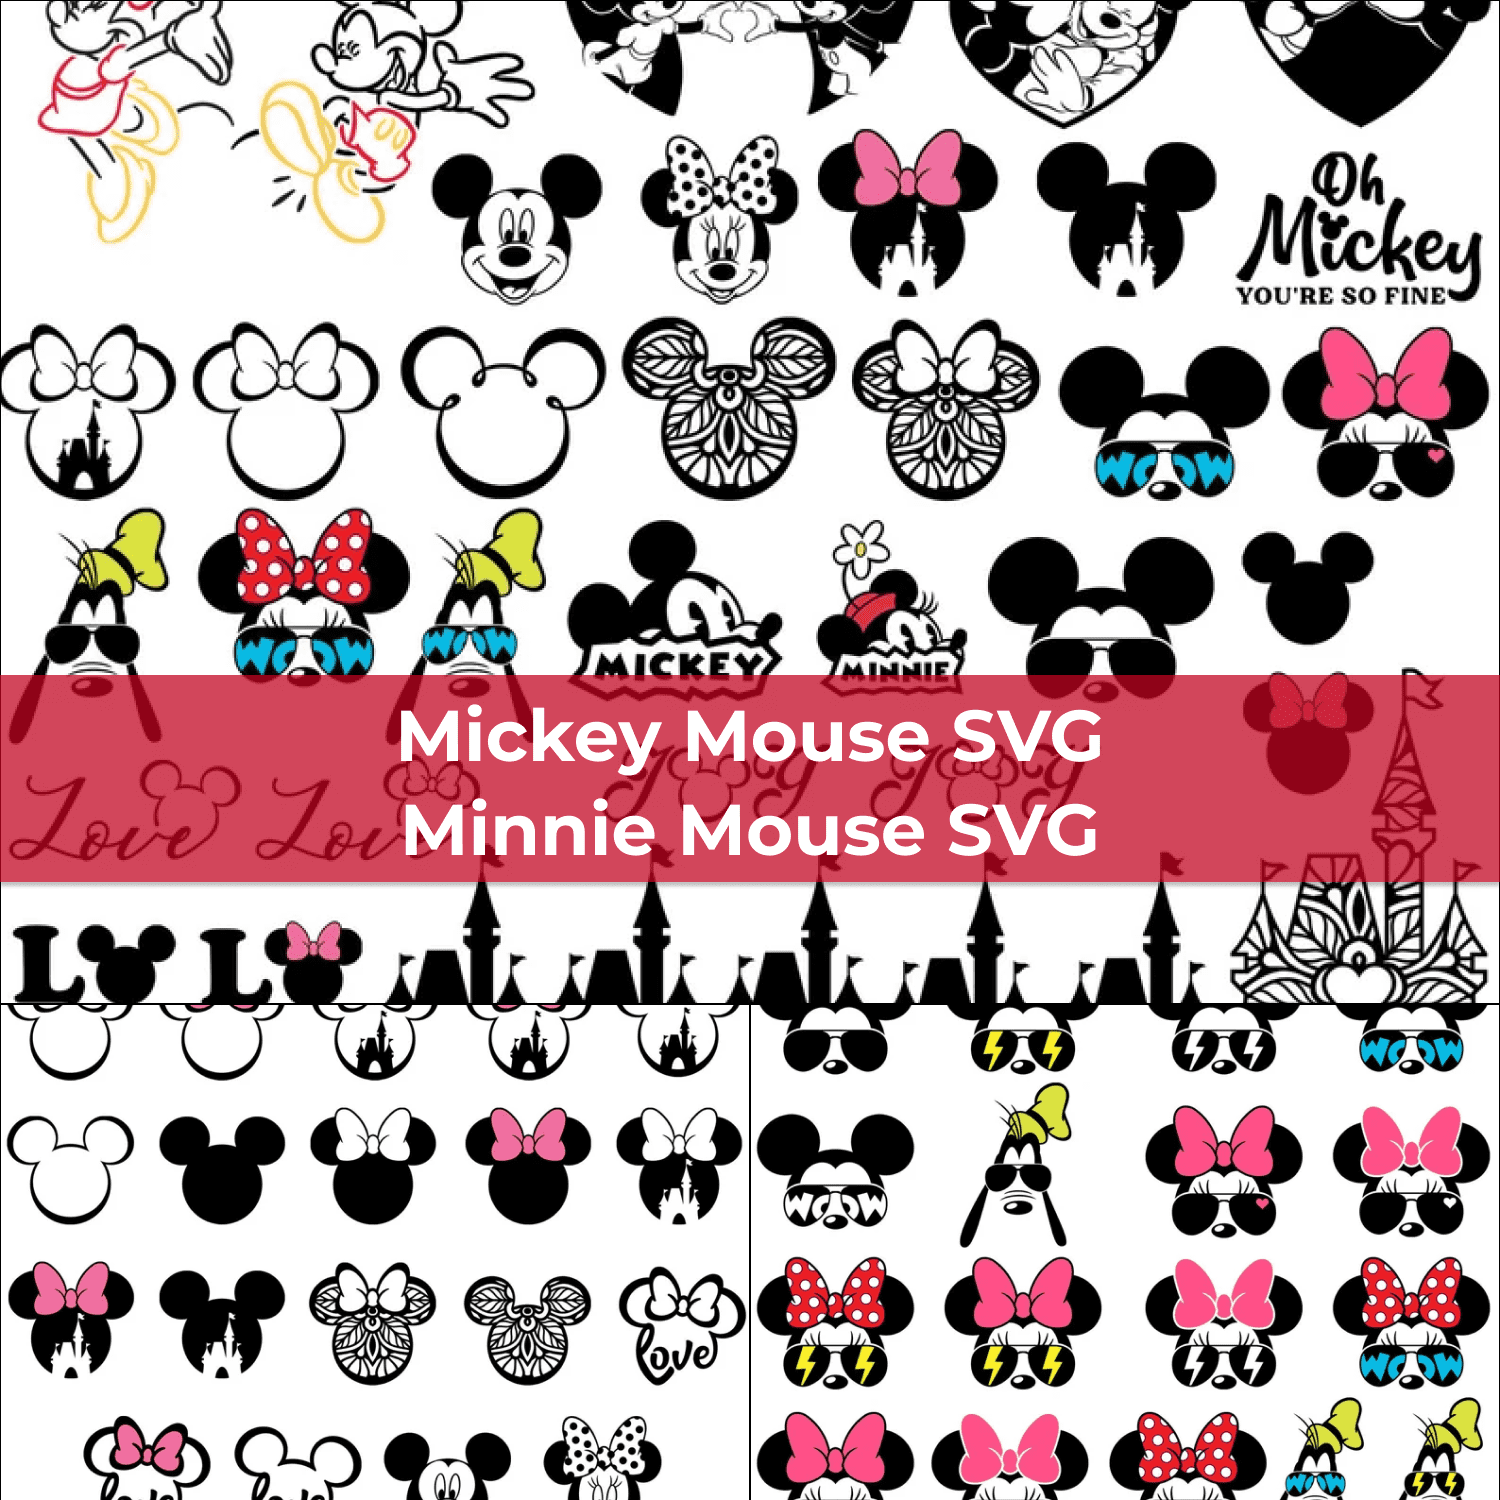 Mickey Mouse SVG, Minnie Mouse SVG, Mickey Head, Minnie Bow.